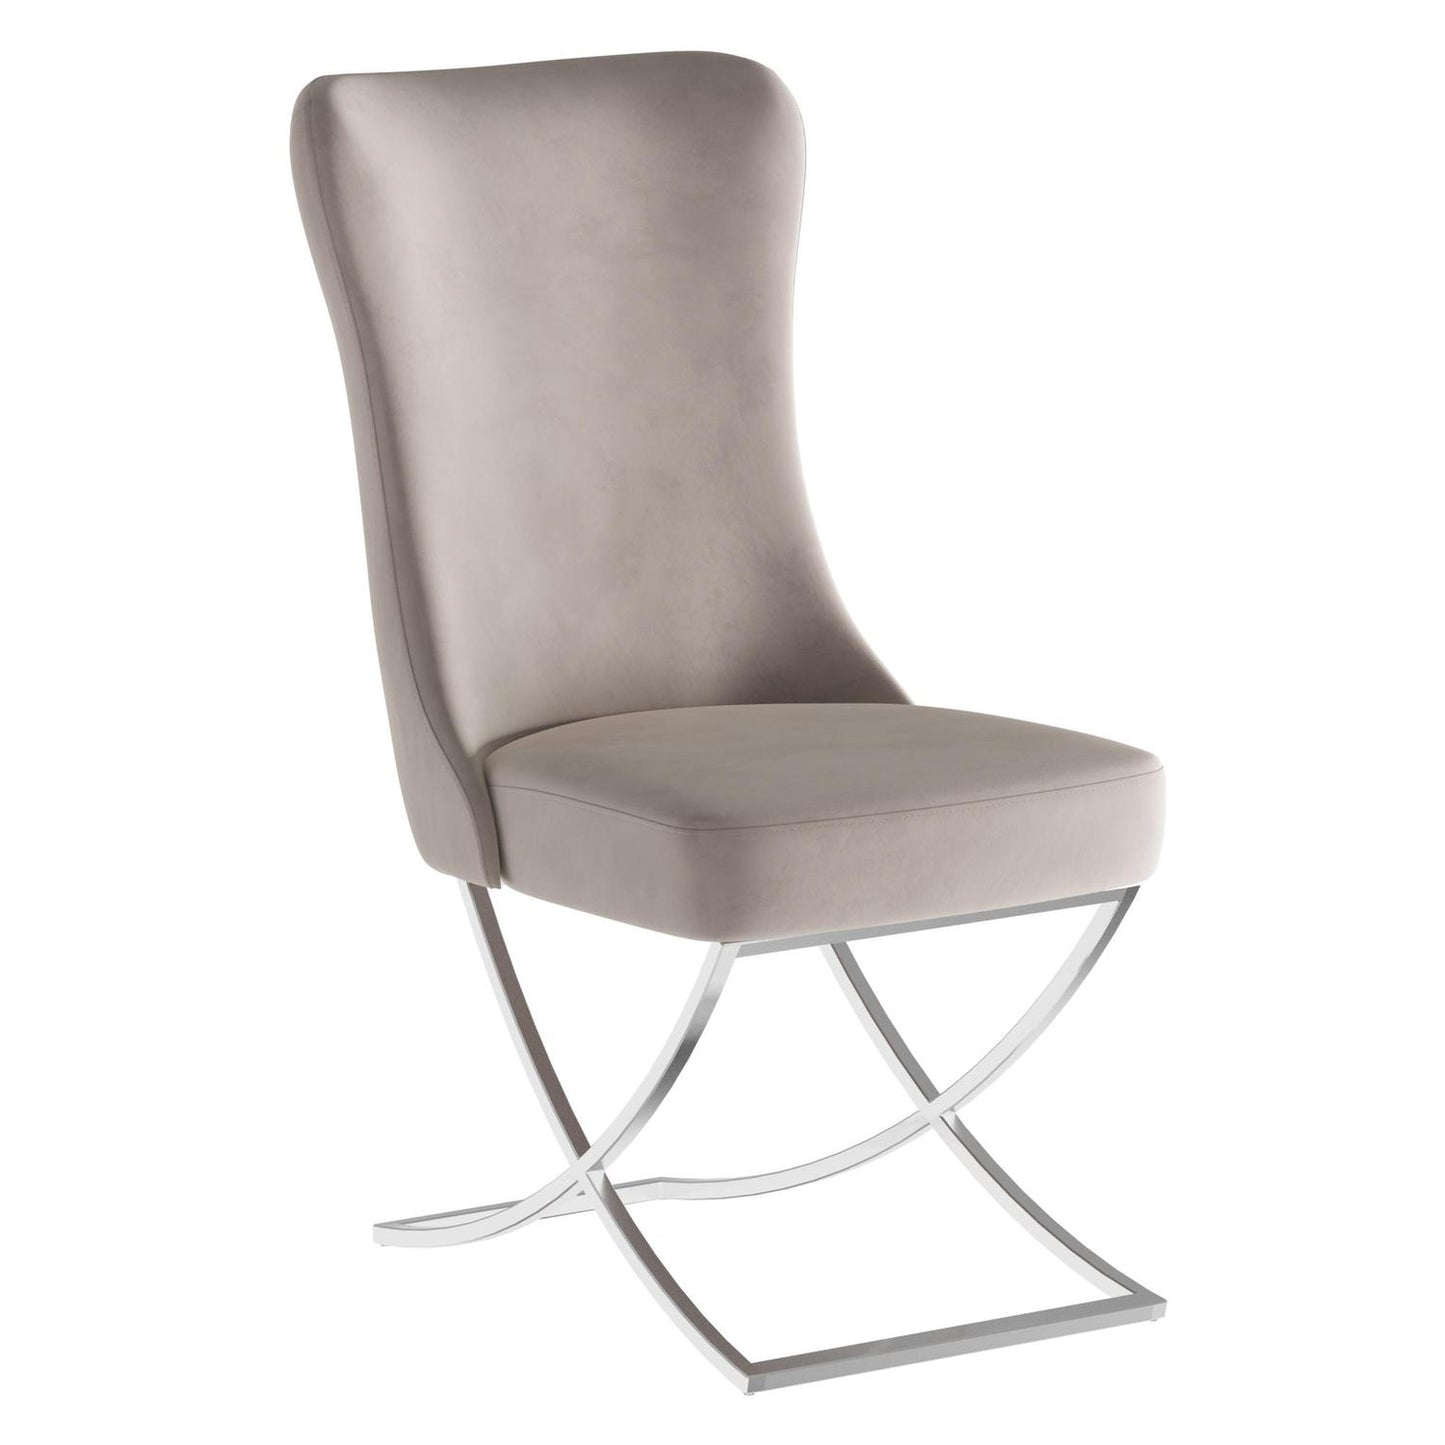 Sultan Collection Wing Back, Modern design, upholstered dining chair in Pearled Ivory with Silver Metal legs in white background the front view.